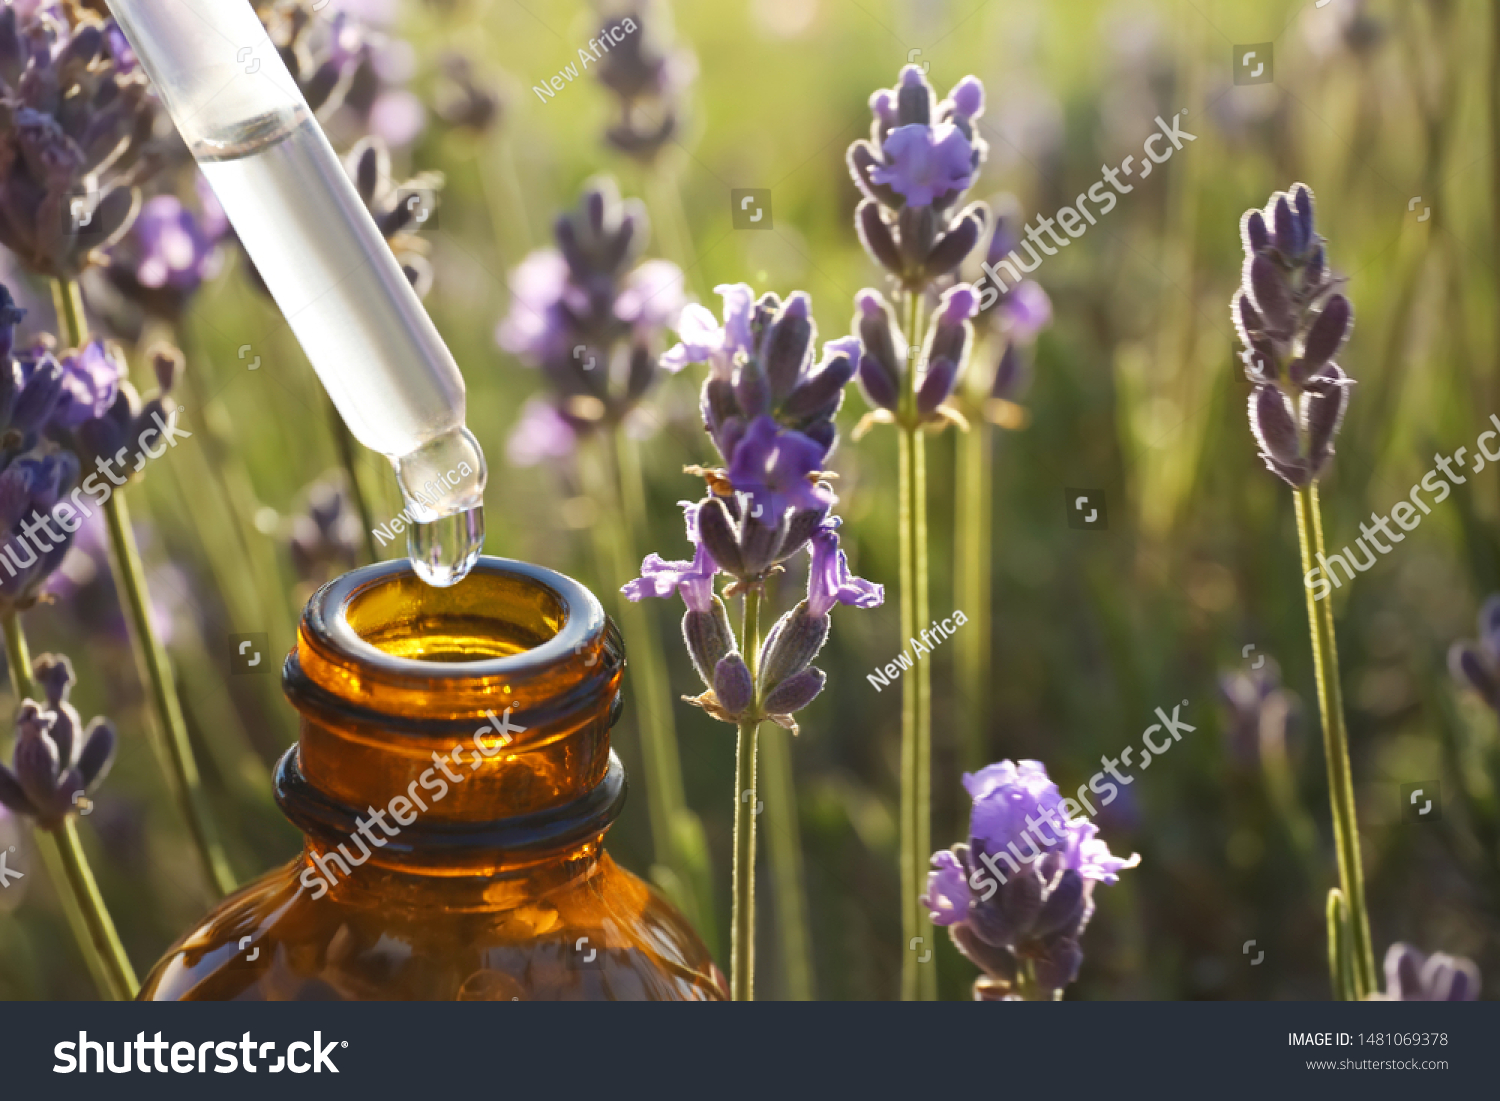 Dropper with lavender essential oil over bottle in blooming field, closeup. Space for text #1481069378